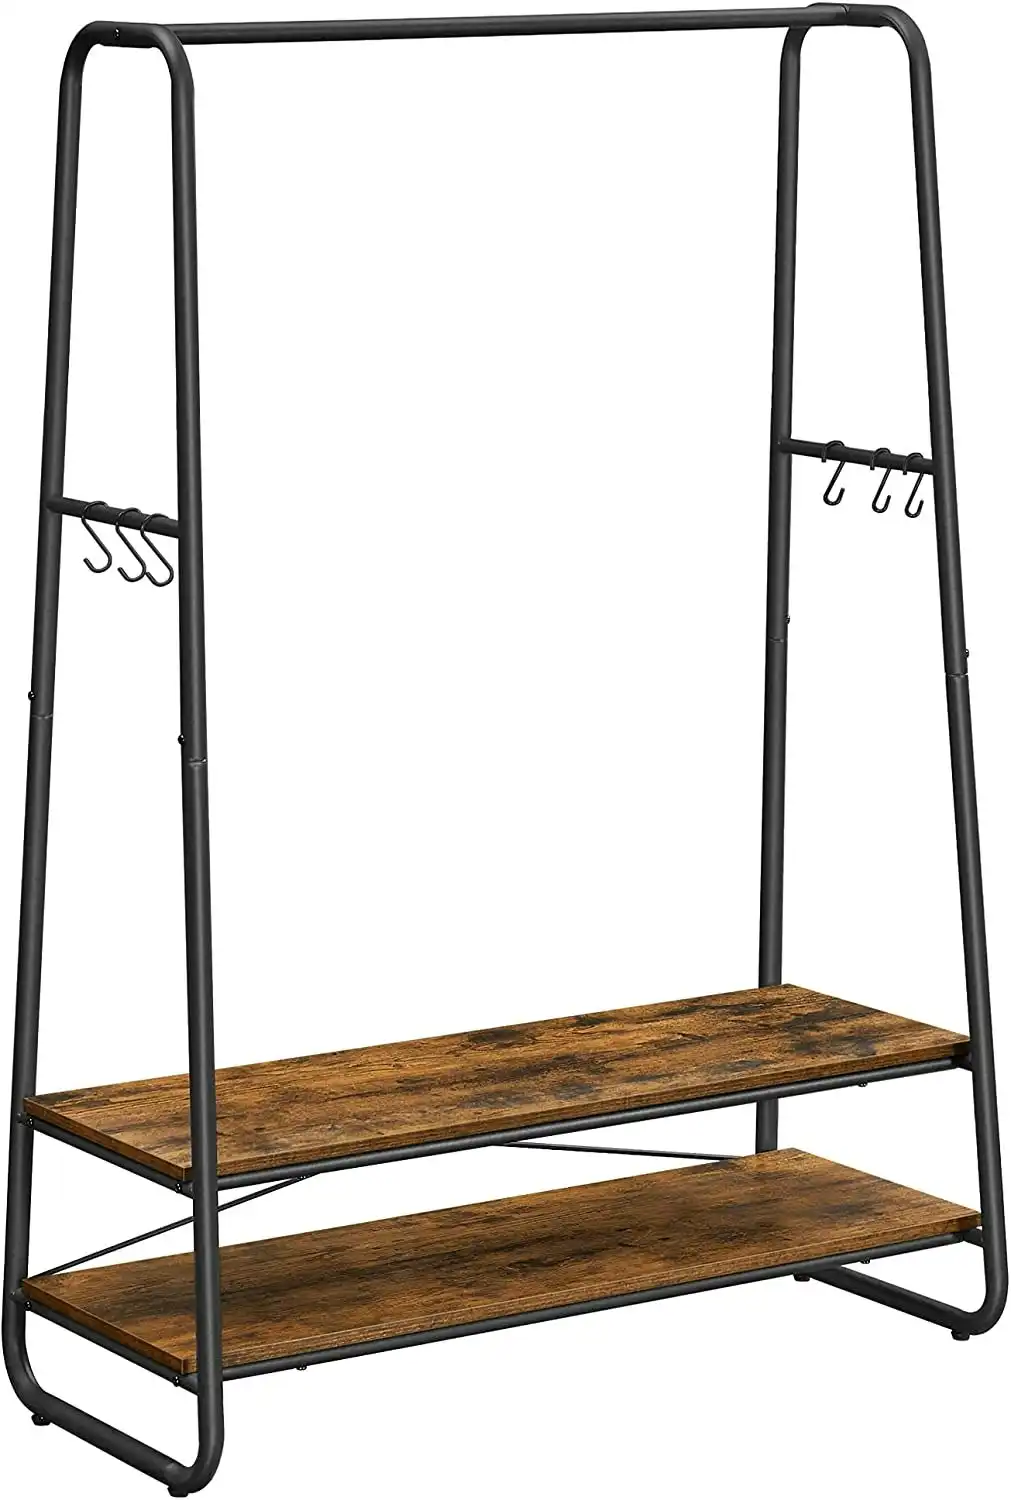 Rustic Brown and Black Heavy Duty Clothes Rack - Garment Rack with 2 Shelves and 6 S Hooks